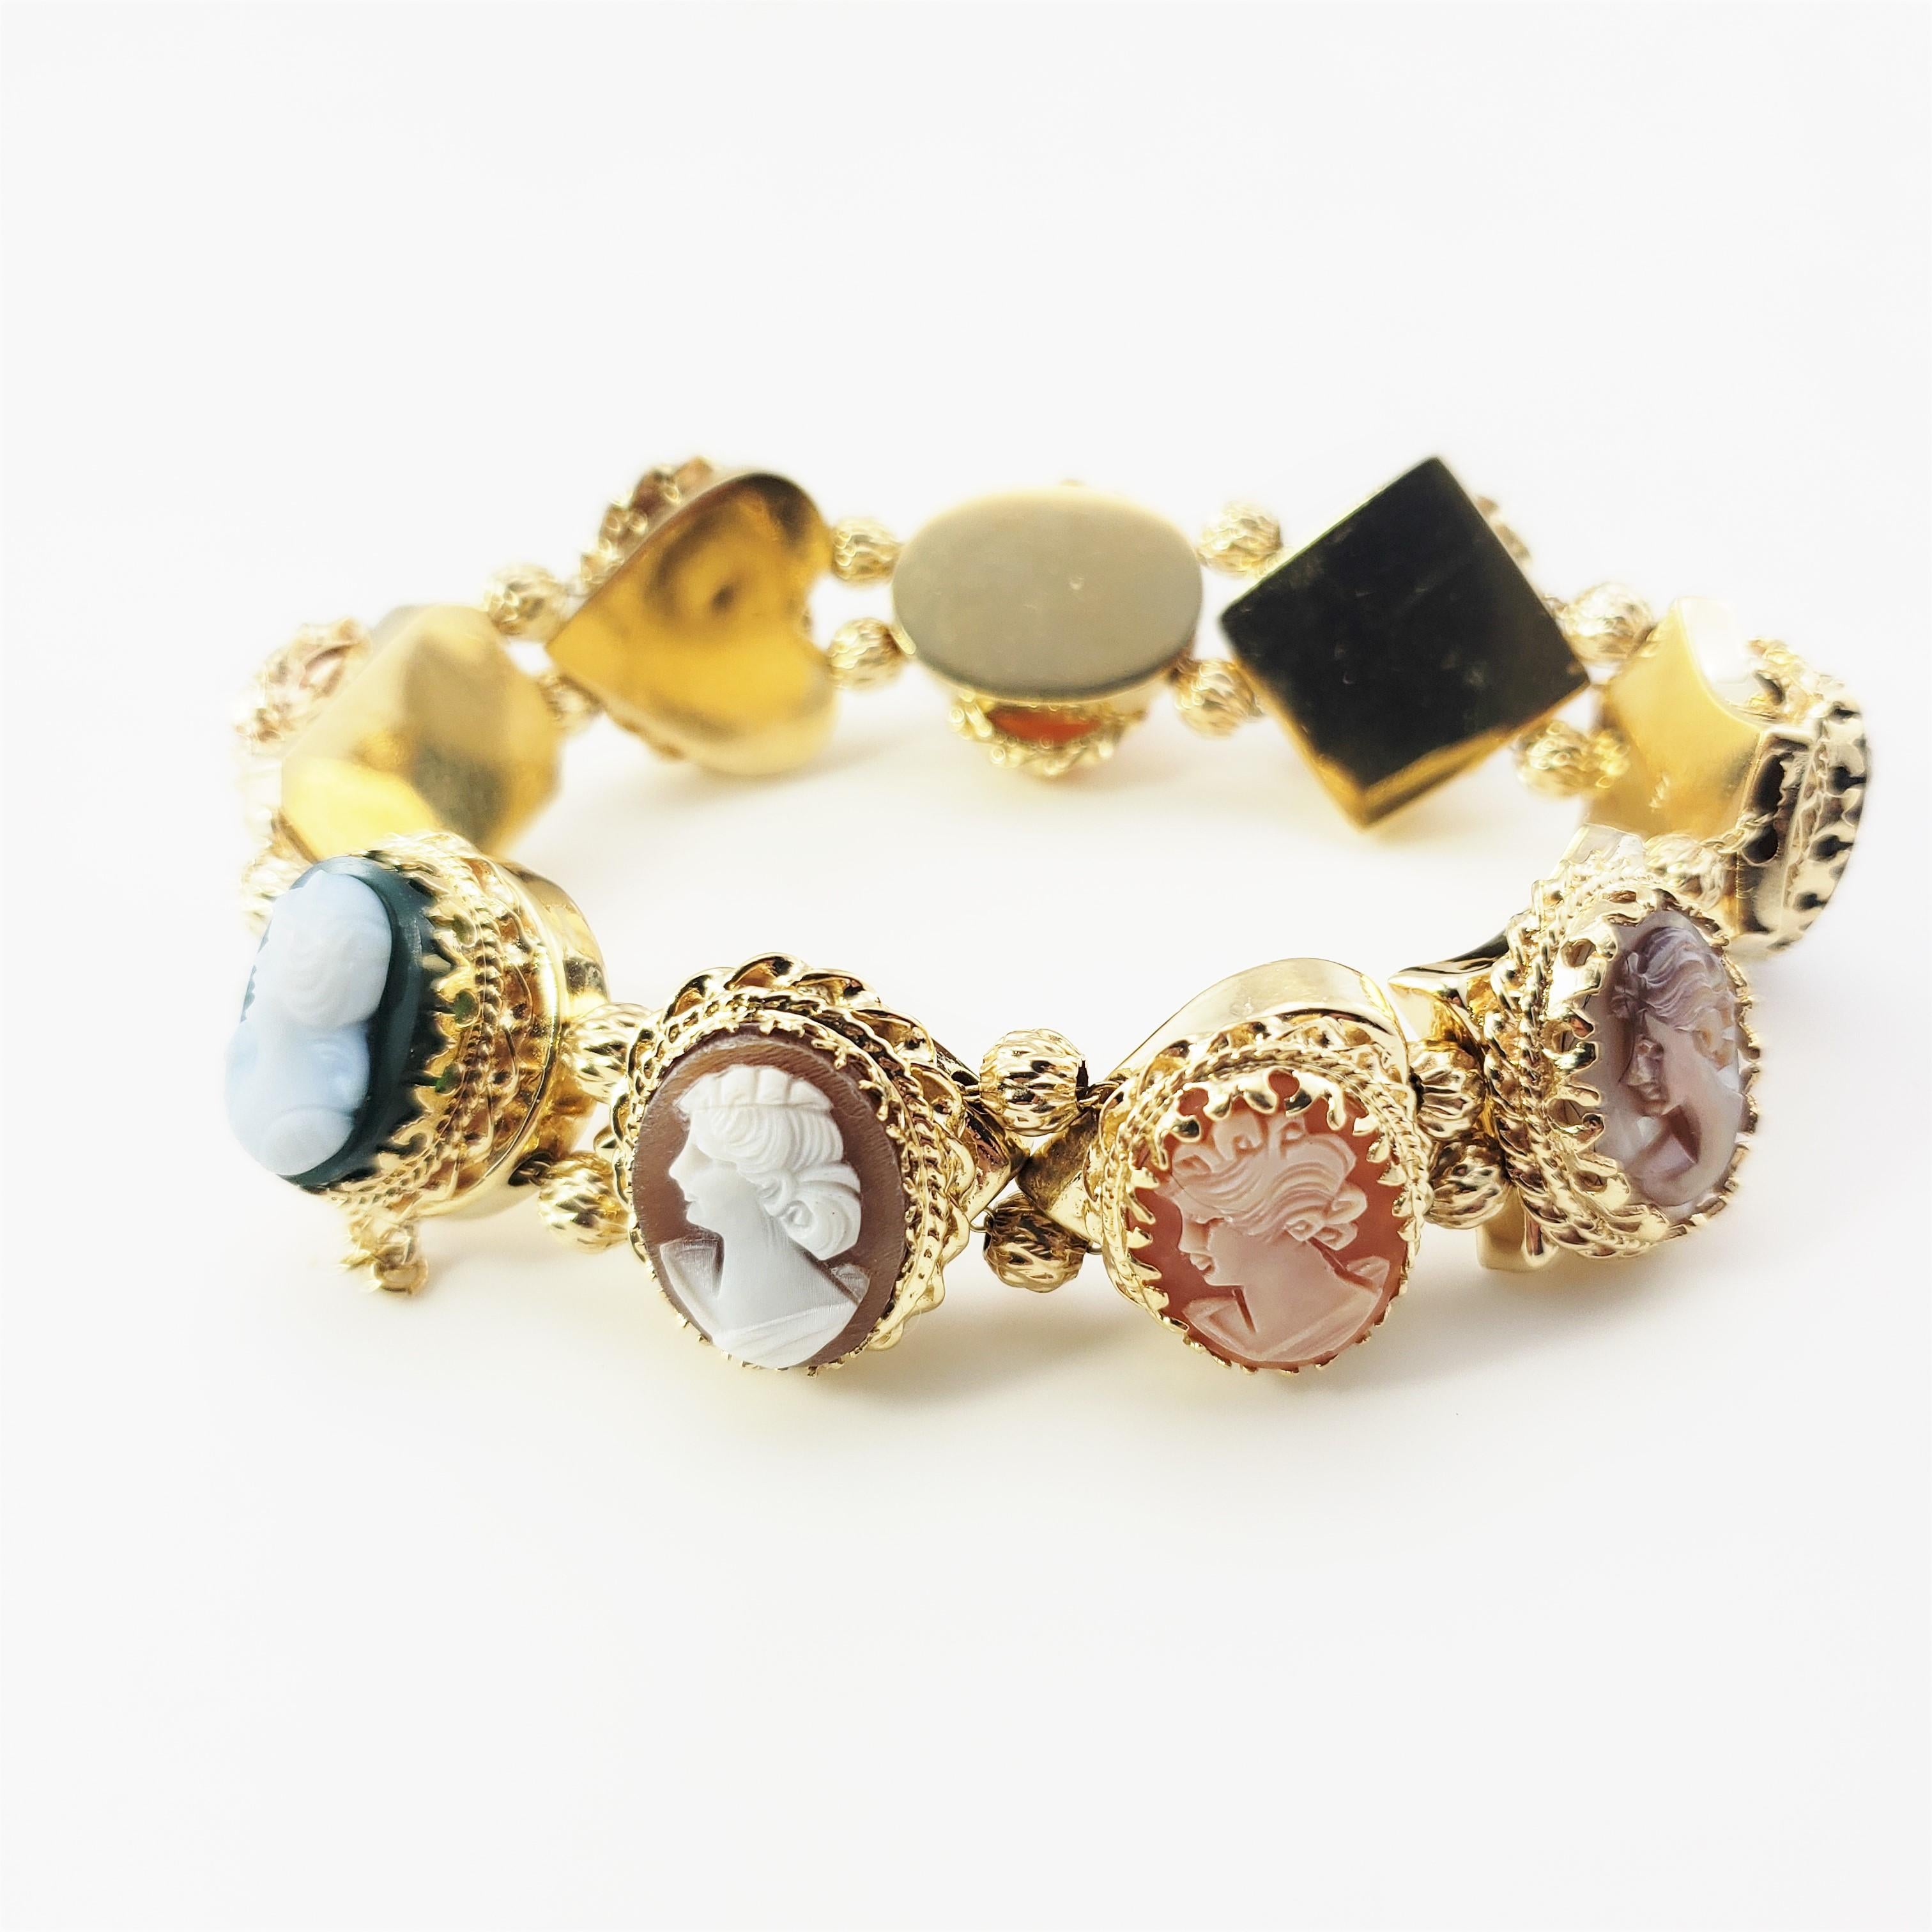 14 Karat Yellow Gold Cameo Bracelet-

This stunning bracelet features nine lovely cameos set in beautifully detailed 14K yellow gold.  Width:  20 mm.  Safety chain closure.

Size:  7.25 inches

Weight:  37.4 dwt. / 58.3 gr.

Stamped: 14K

Very good